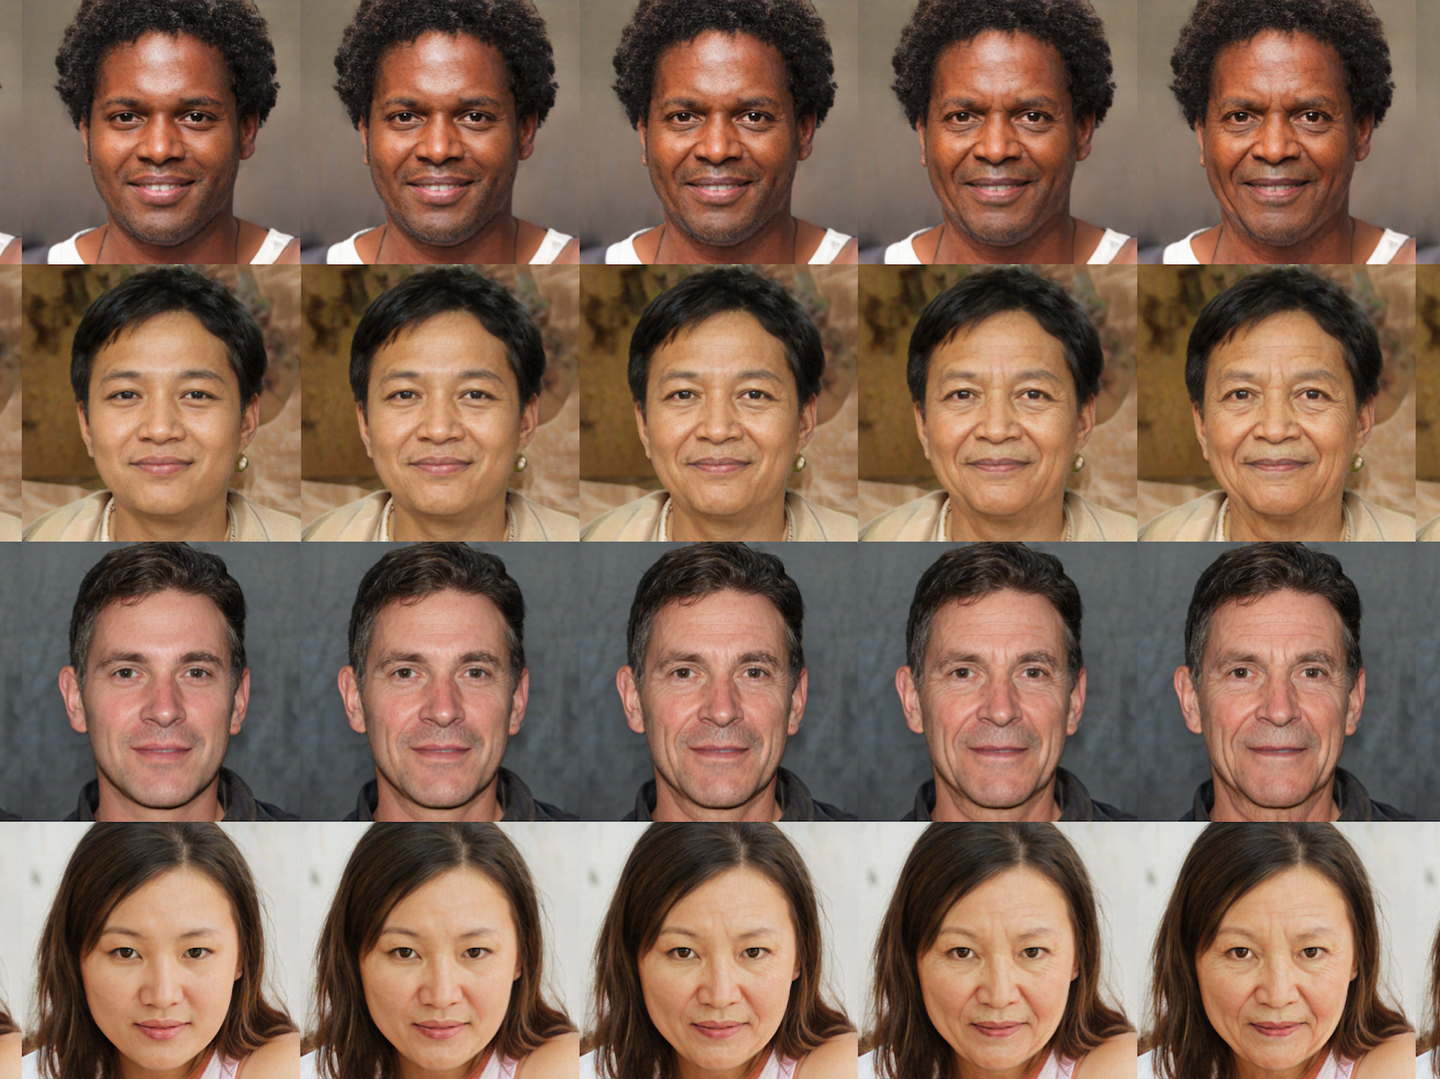 Collage of Disney's artificially aged portraits